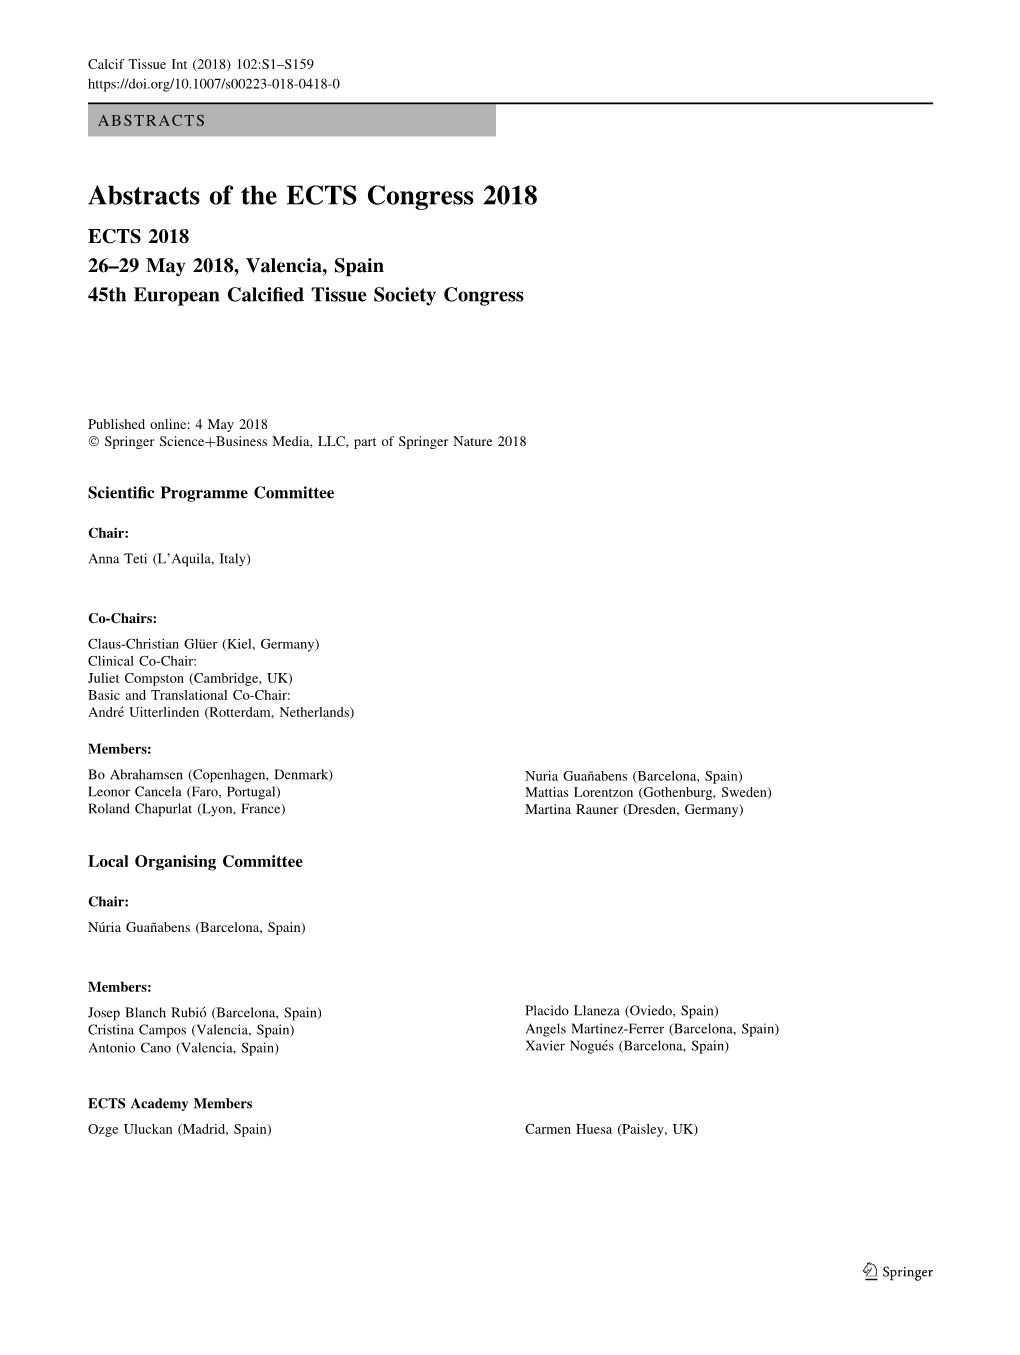 Abstracts of the ECTS Congress 2018 ECTS 2018 26–29 May 2018, Valencia, Spain 45Th European Calciﬁed Tissue Society Congress